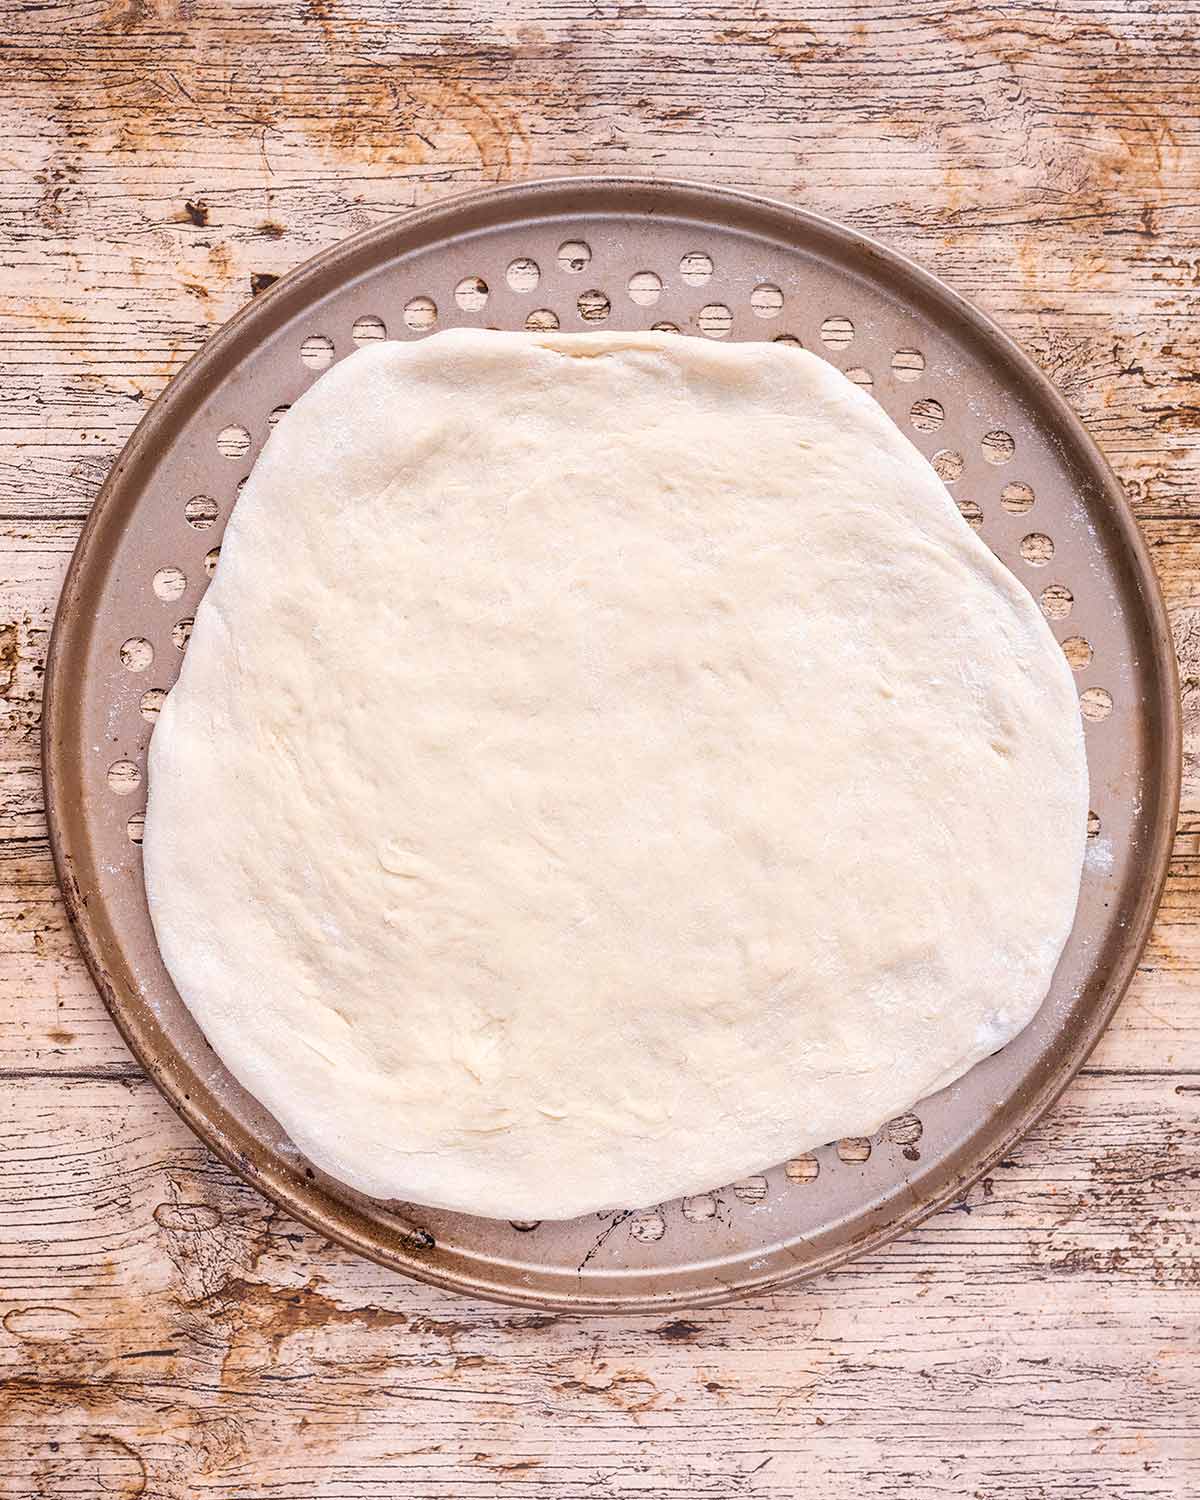 Pizza dough stretched out on a pizza cooking tray.